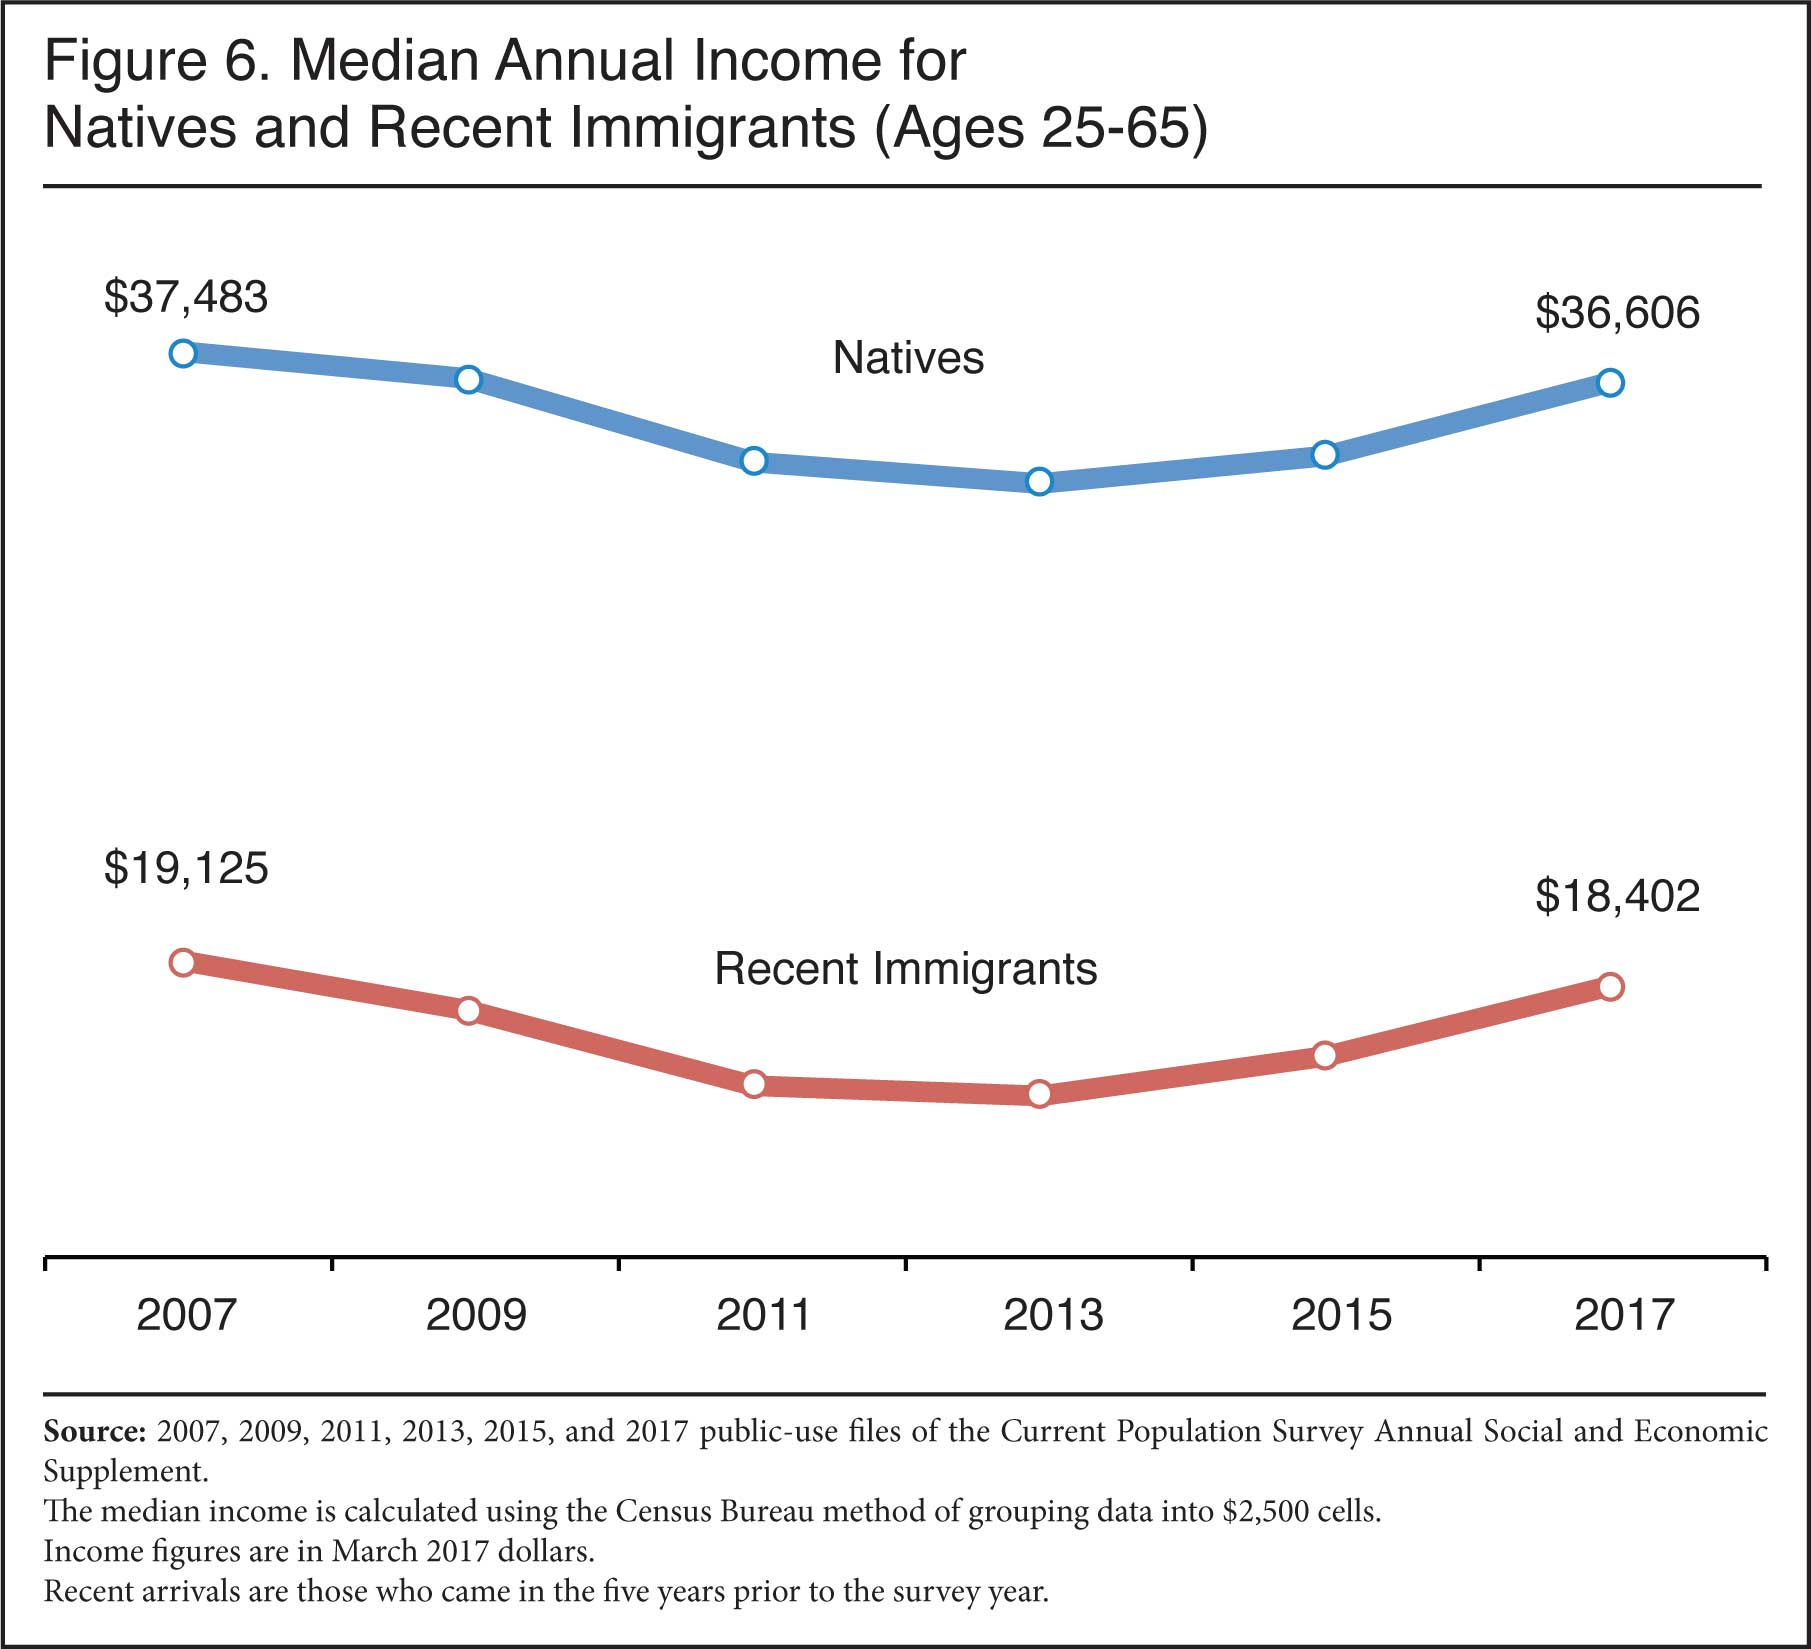 Graph: Median Annual Income for Natives and Recent Immigrants, 2007 to 2017